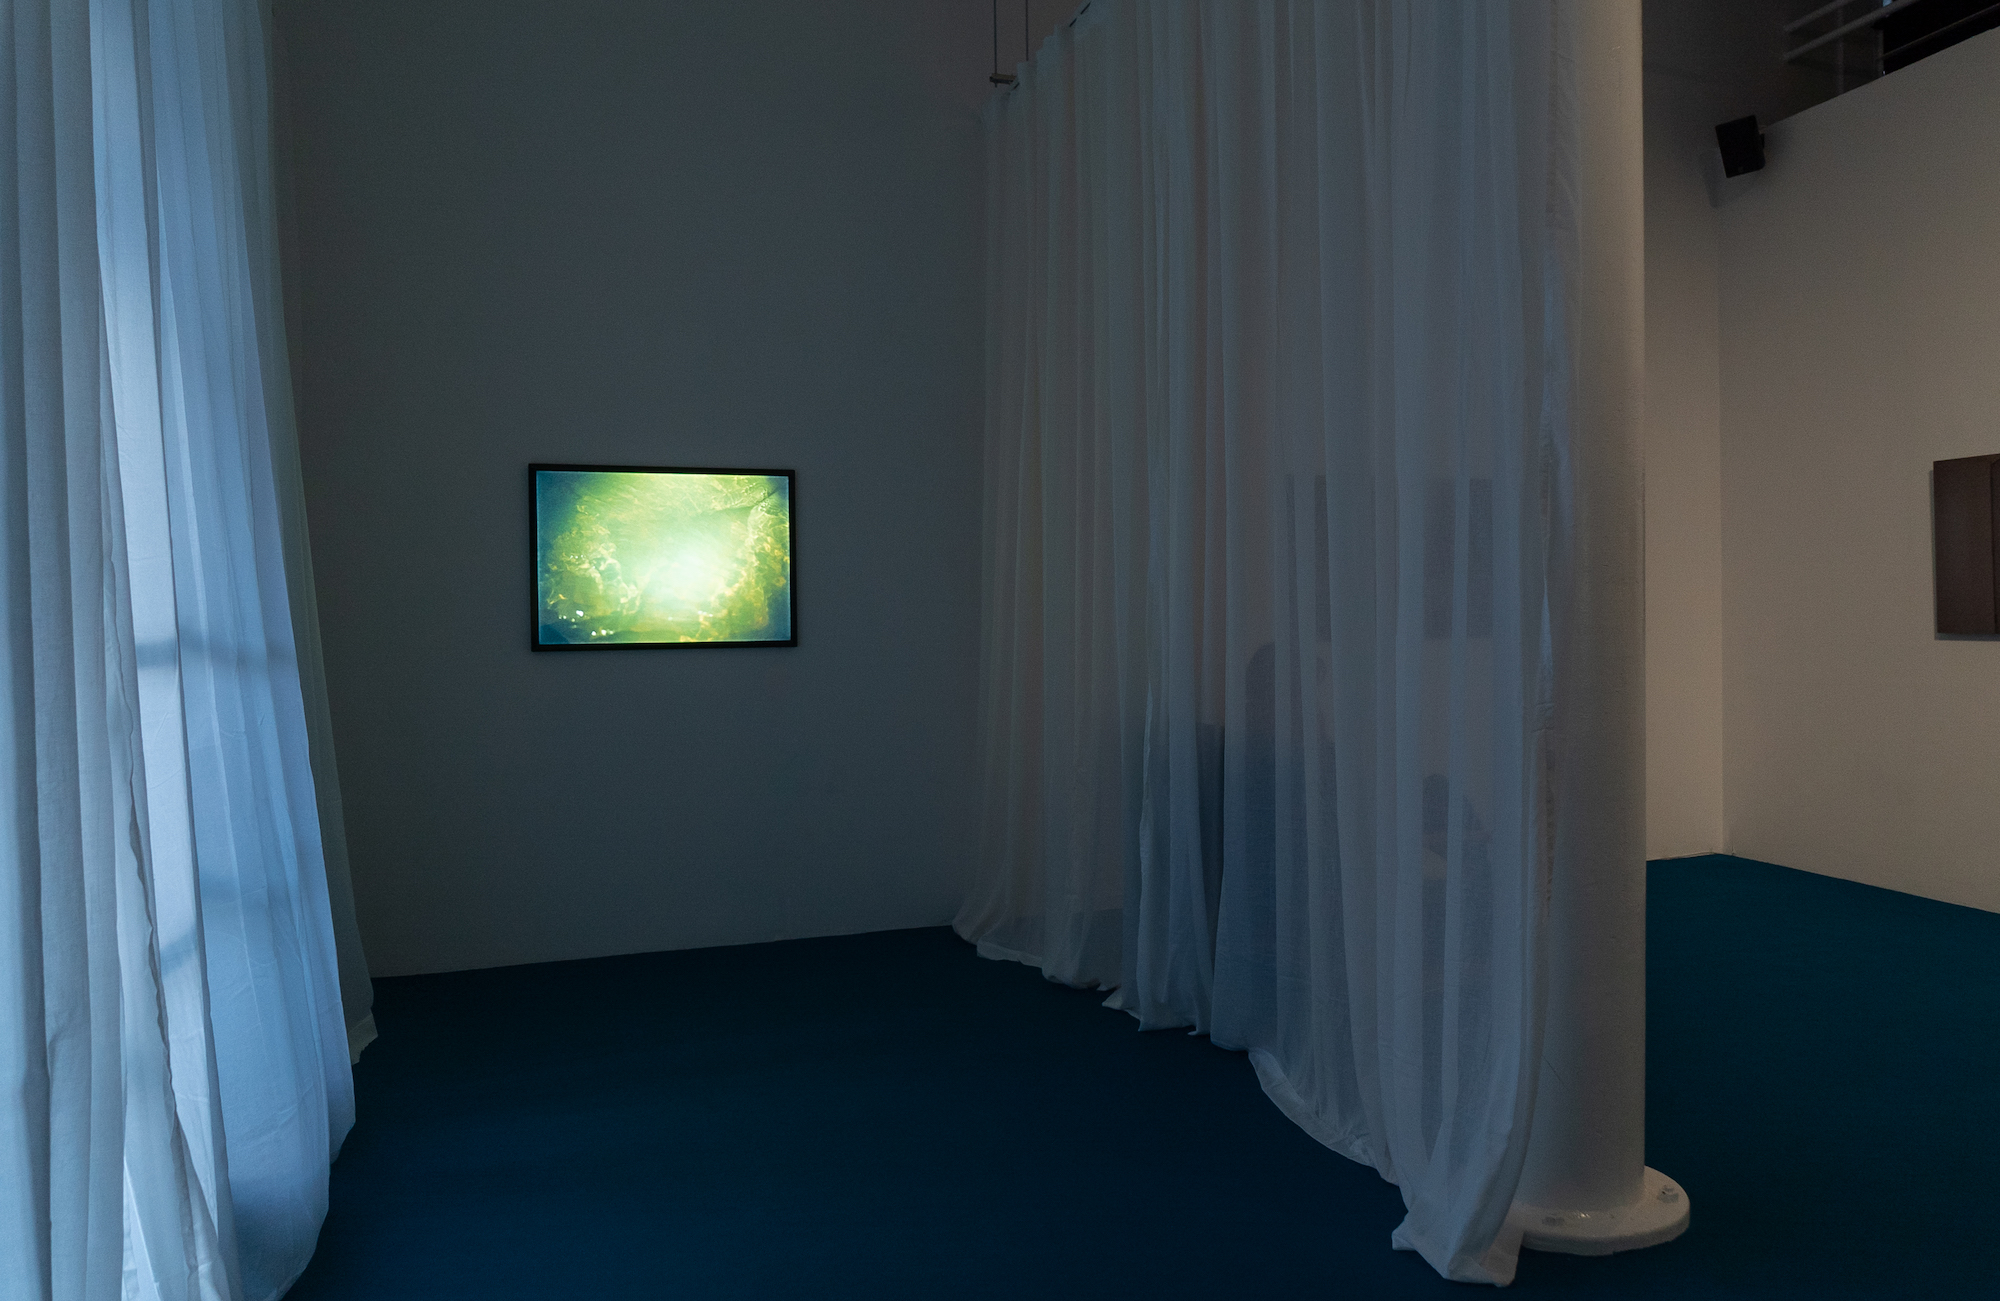 A dimly lit room with a lightbox containing a photograph of aforementioned shimmery green water, this is all framed by two sheer curtains which soft light filters through.